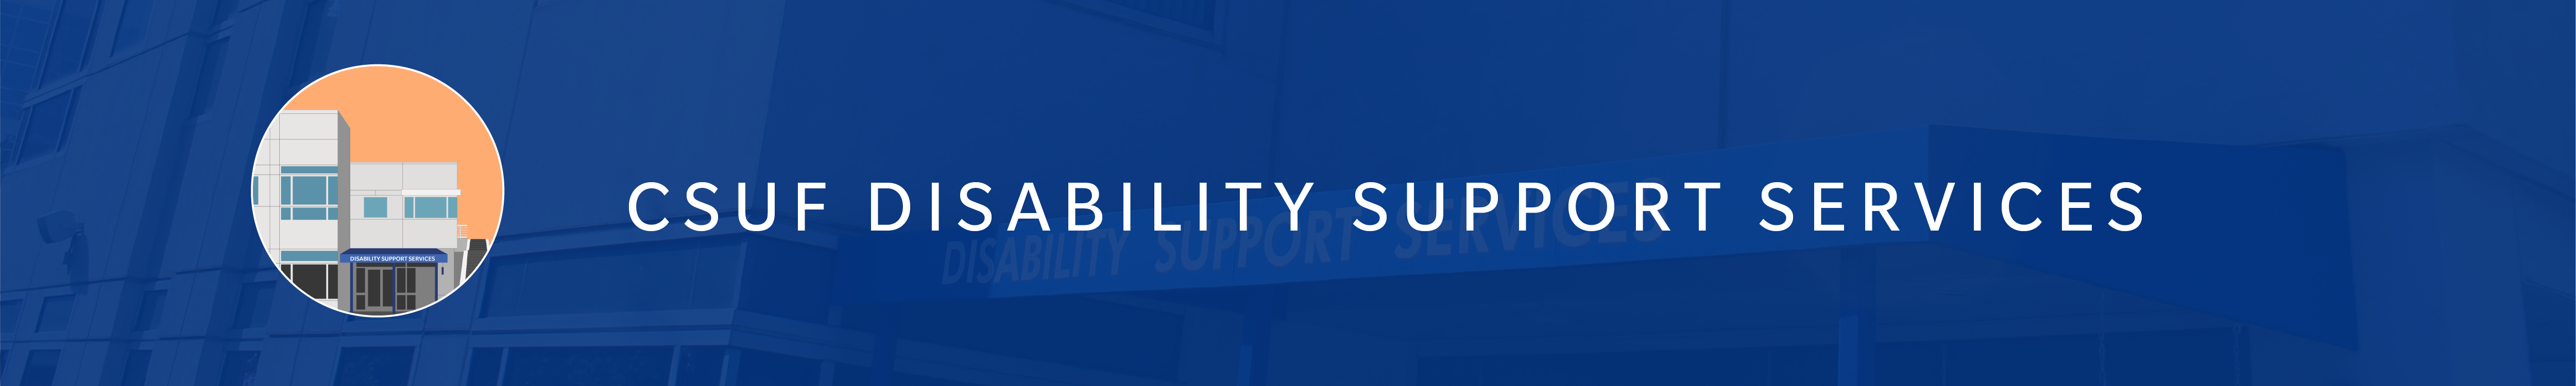 CSUF Disability Support Services